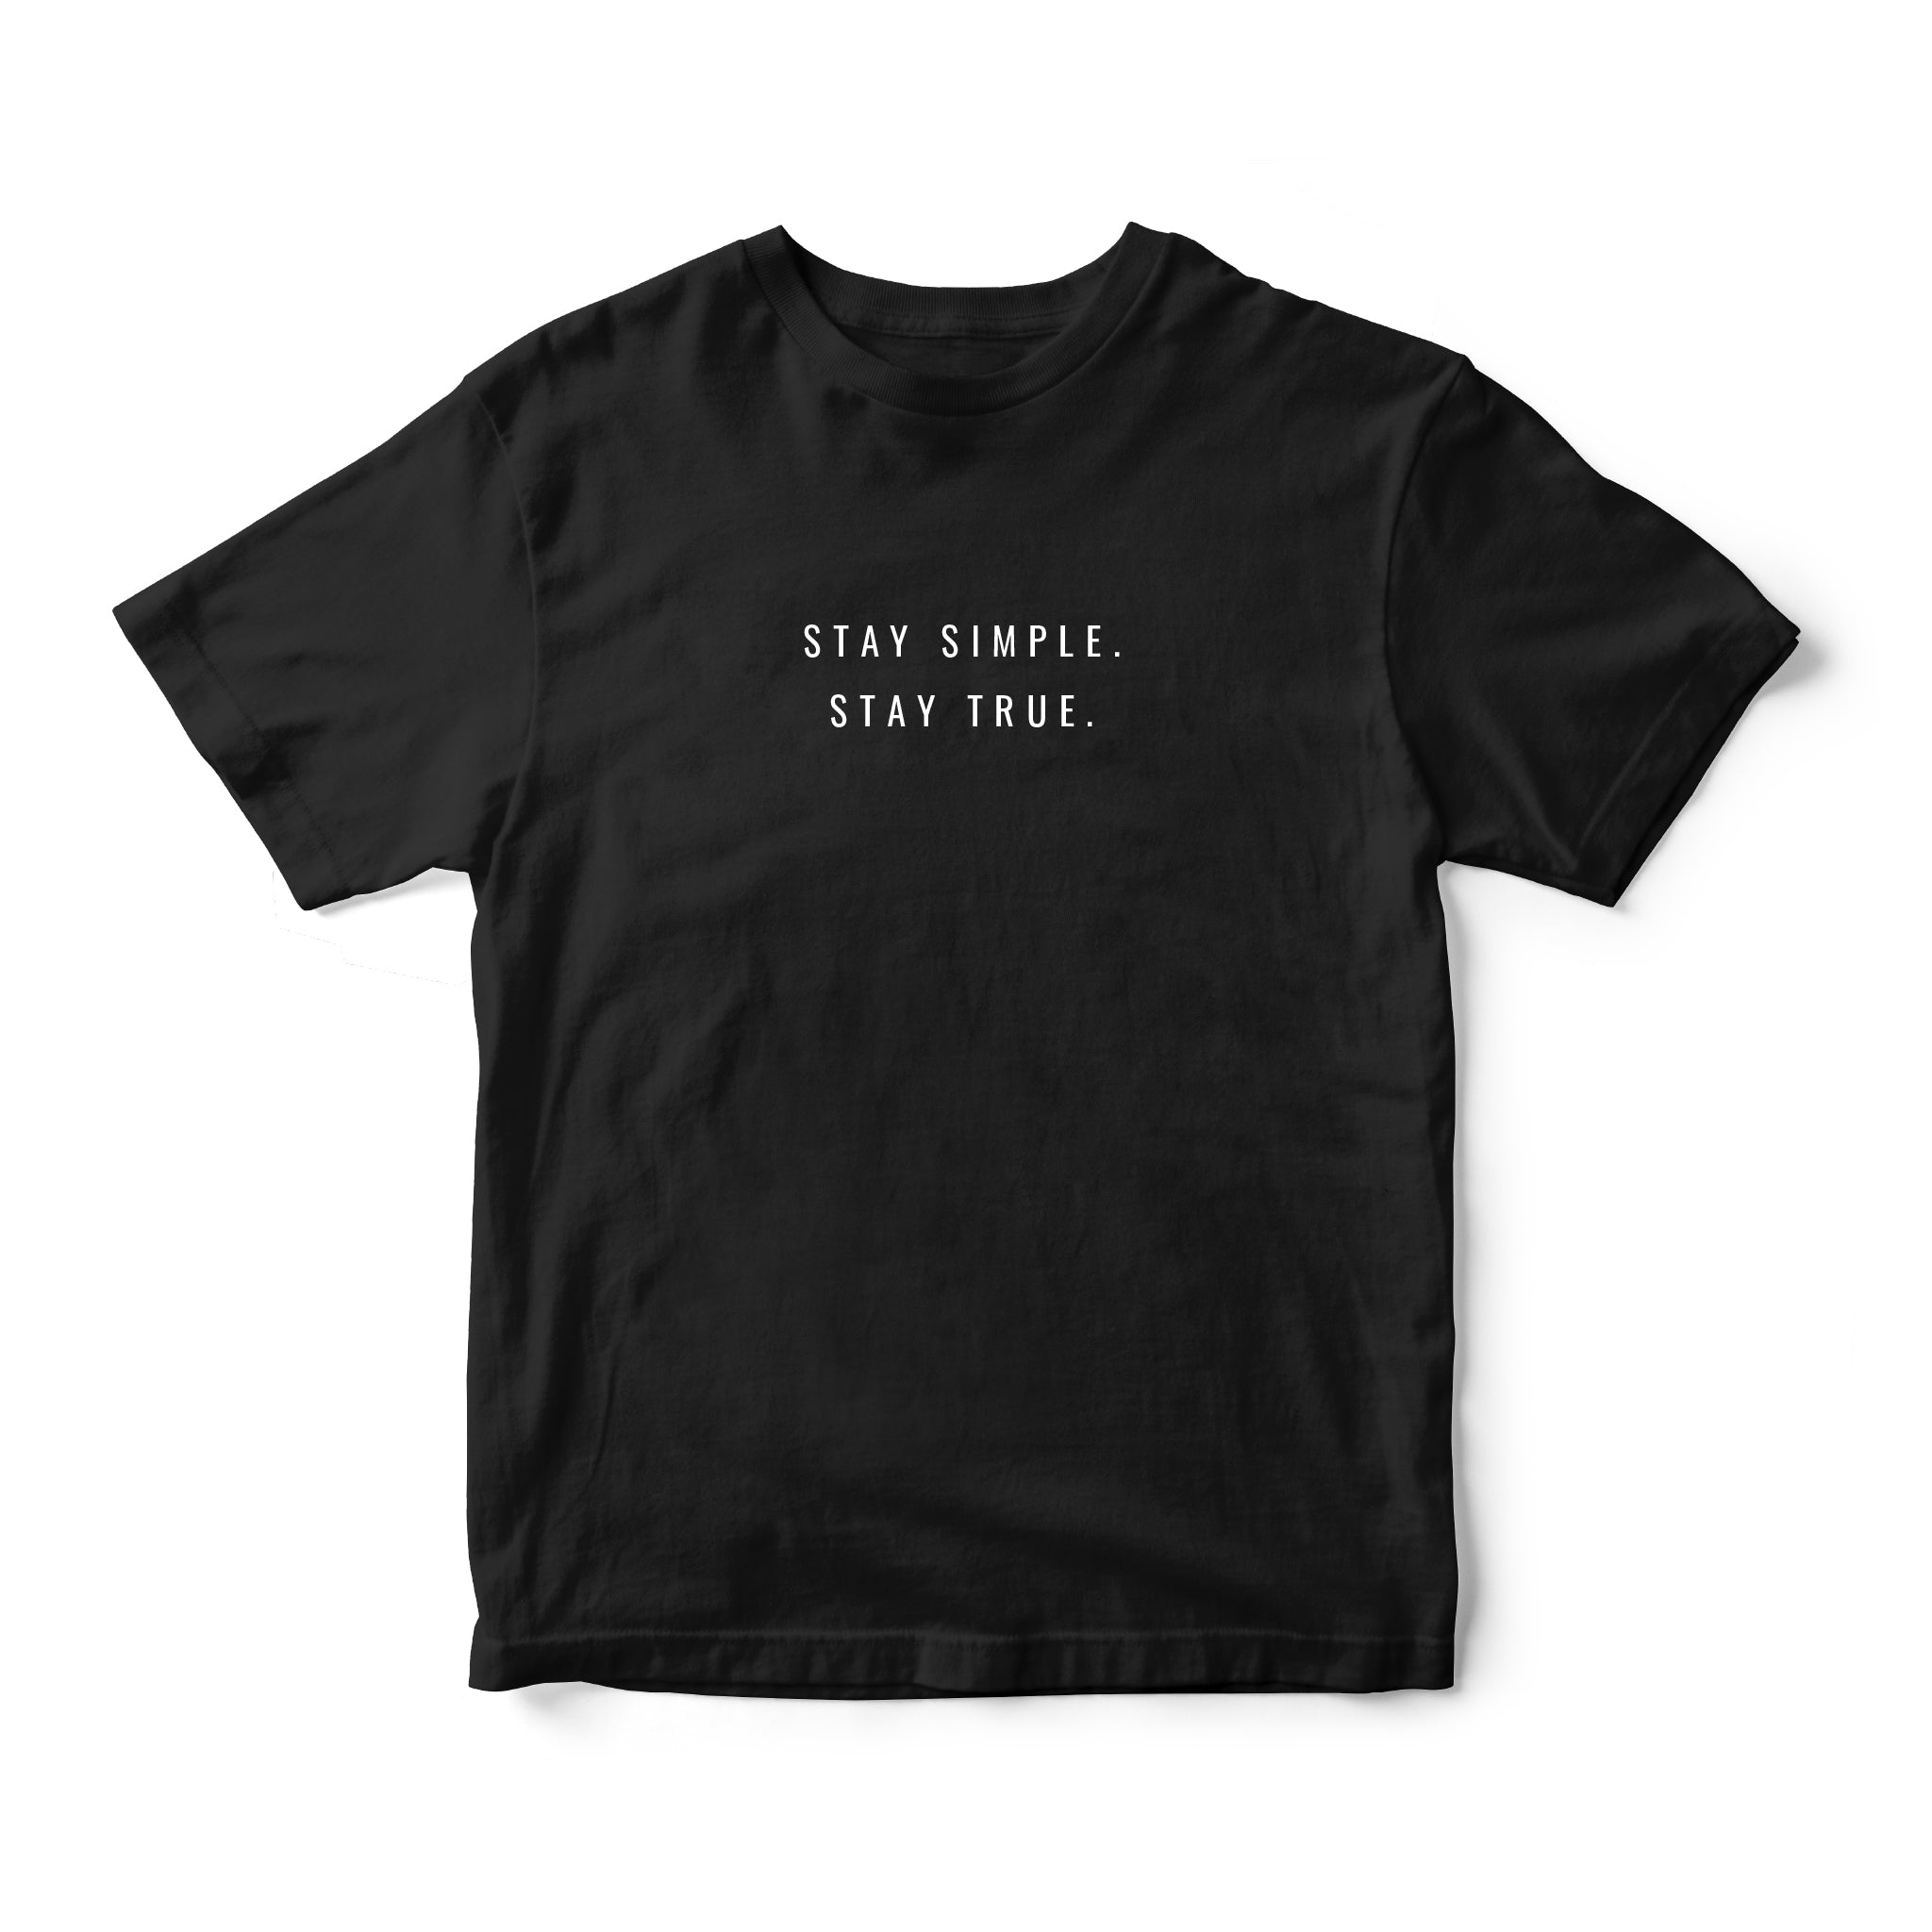 Instee Stay Simple Stay True T-shirt Unisex 100% Cotton